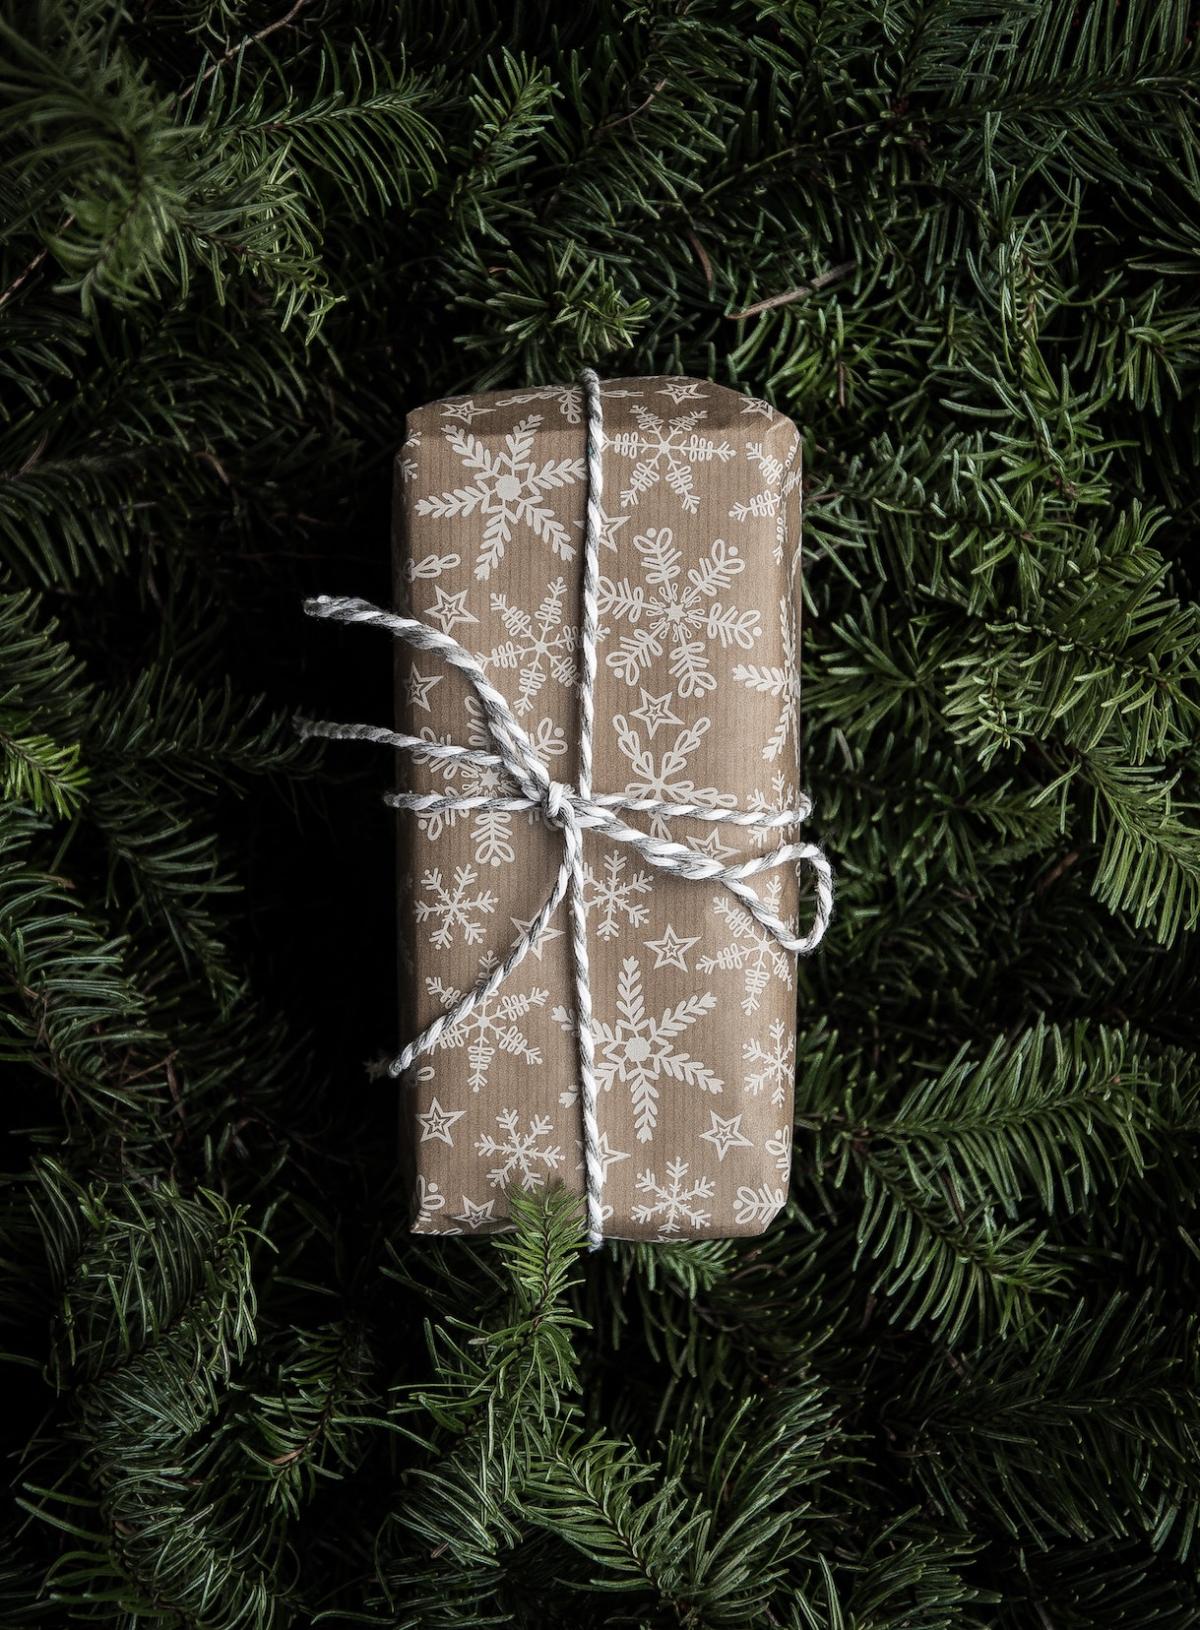 Read Shopping Sustainably During the Most Wonderful (and Wasteful) Time of the Year